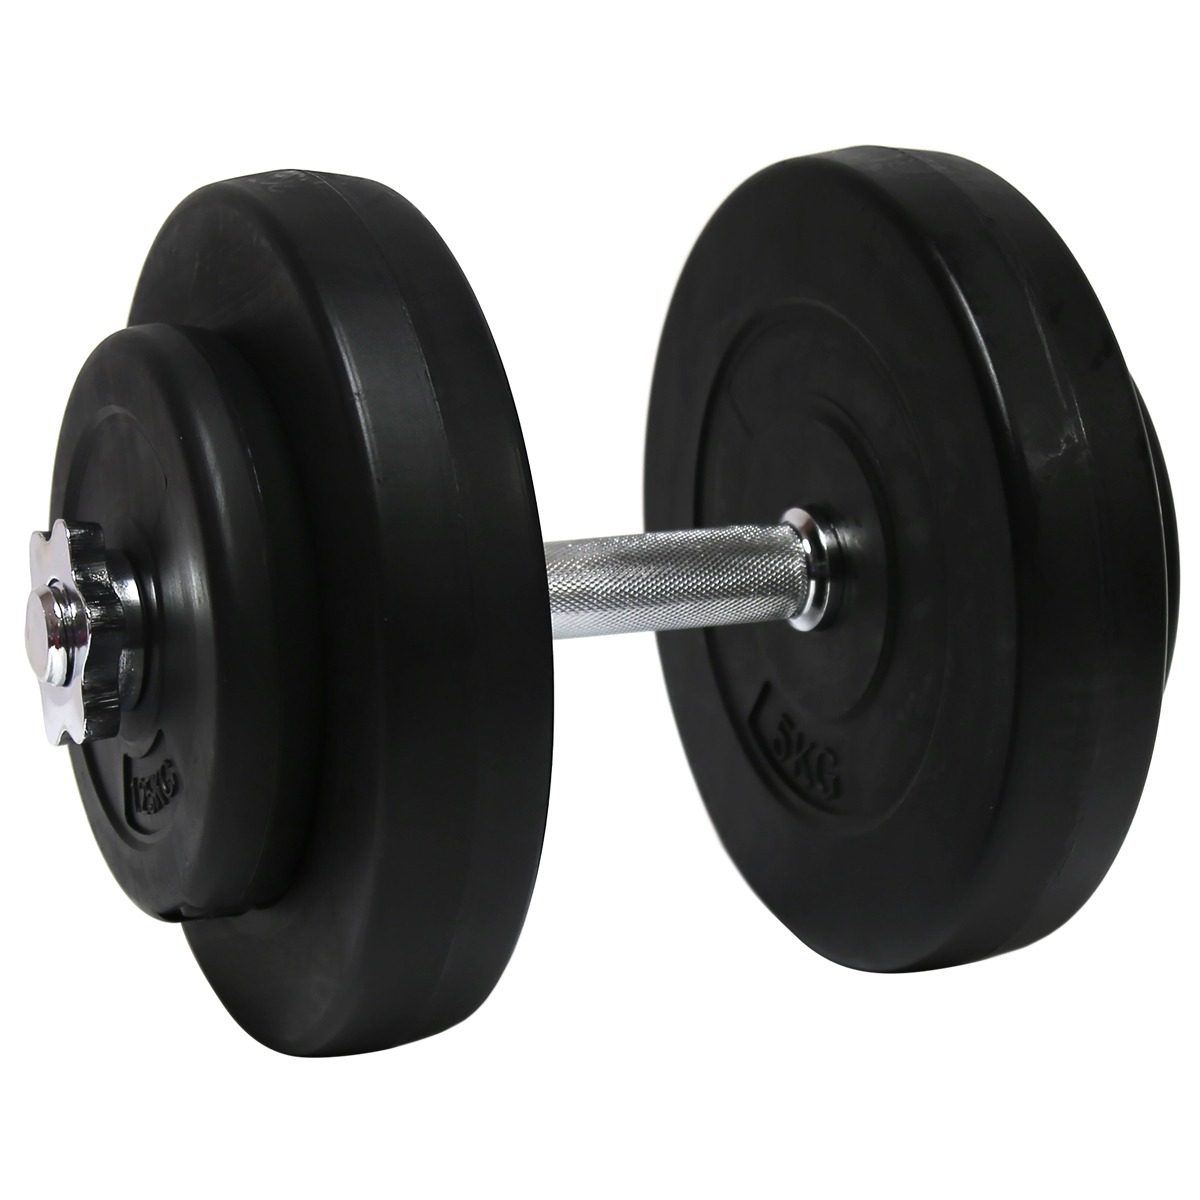 15kg Cement Dumbbell And Weights Training Exercise Spinlock Gym